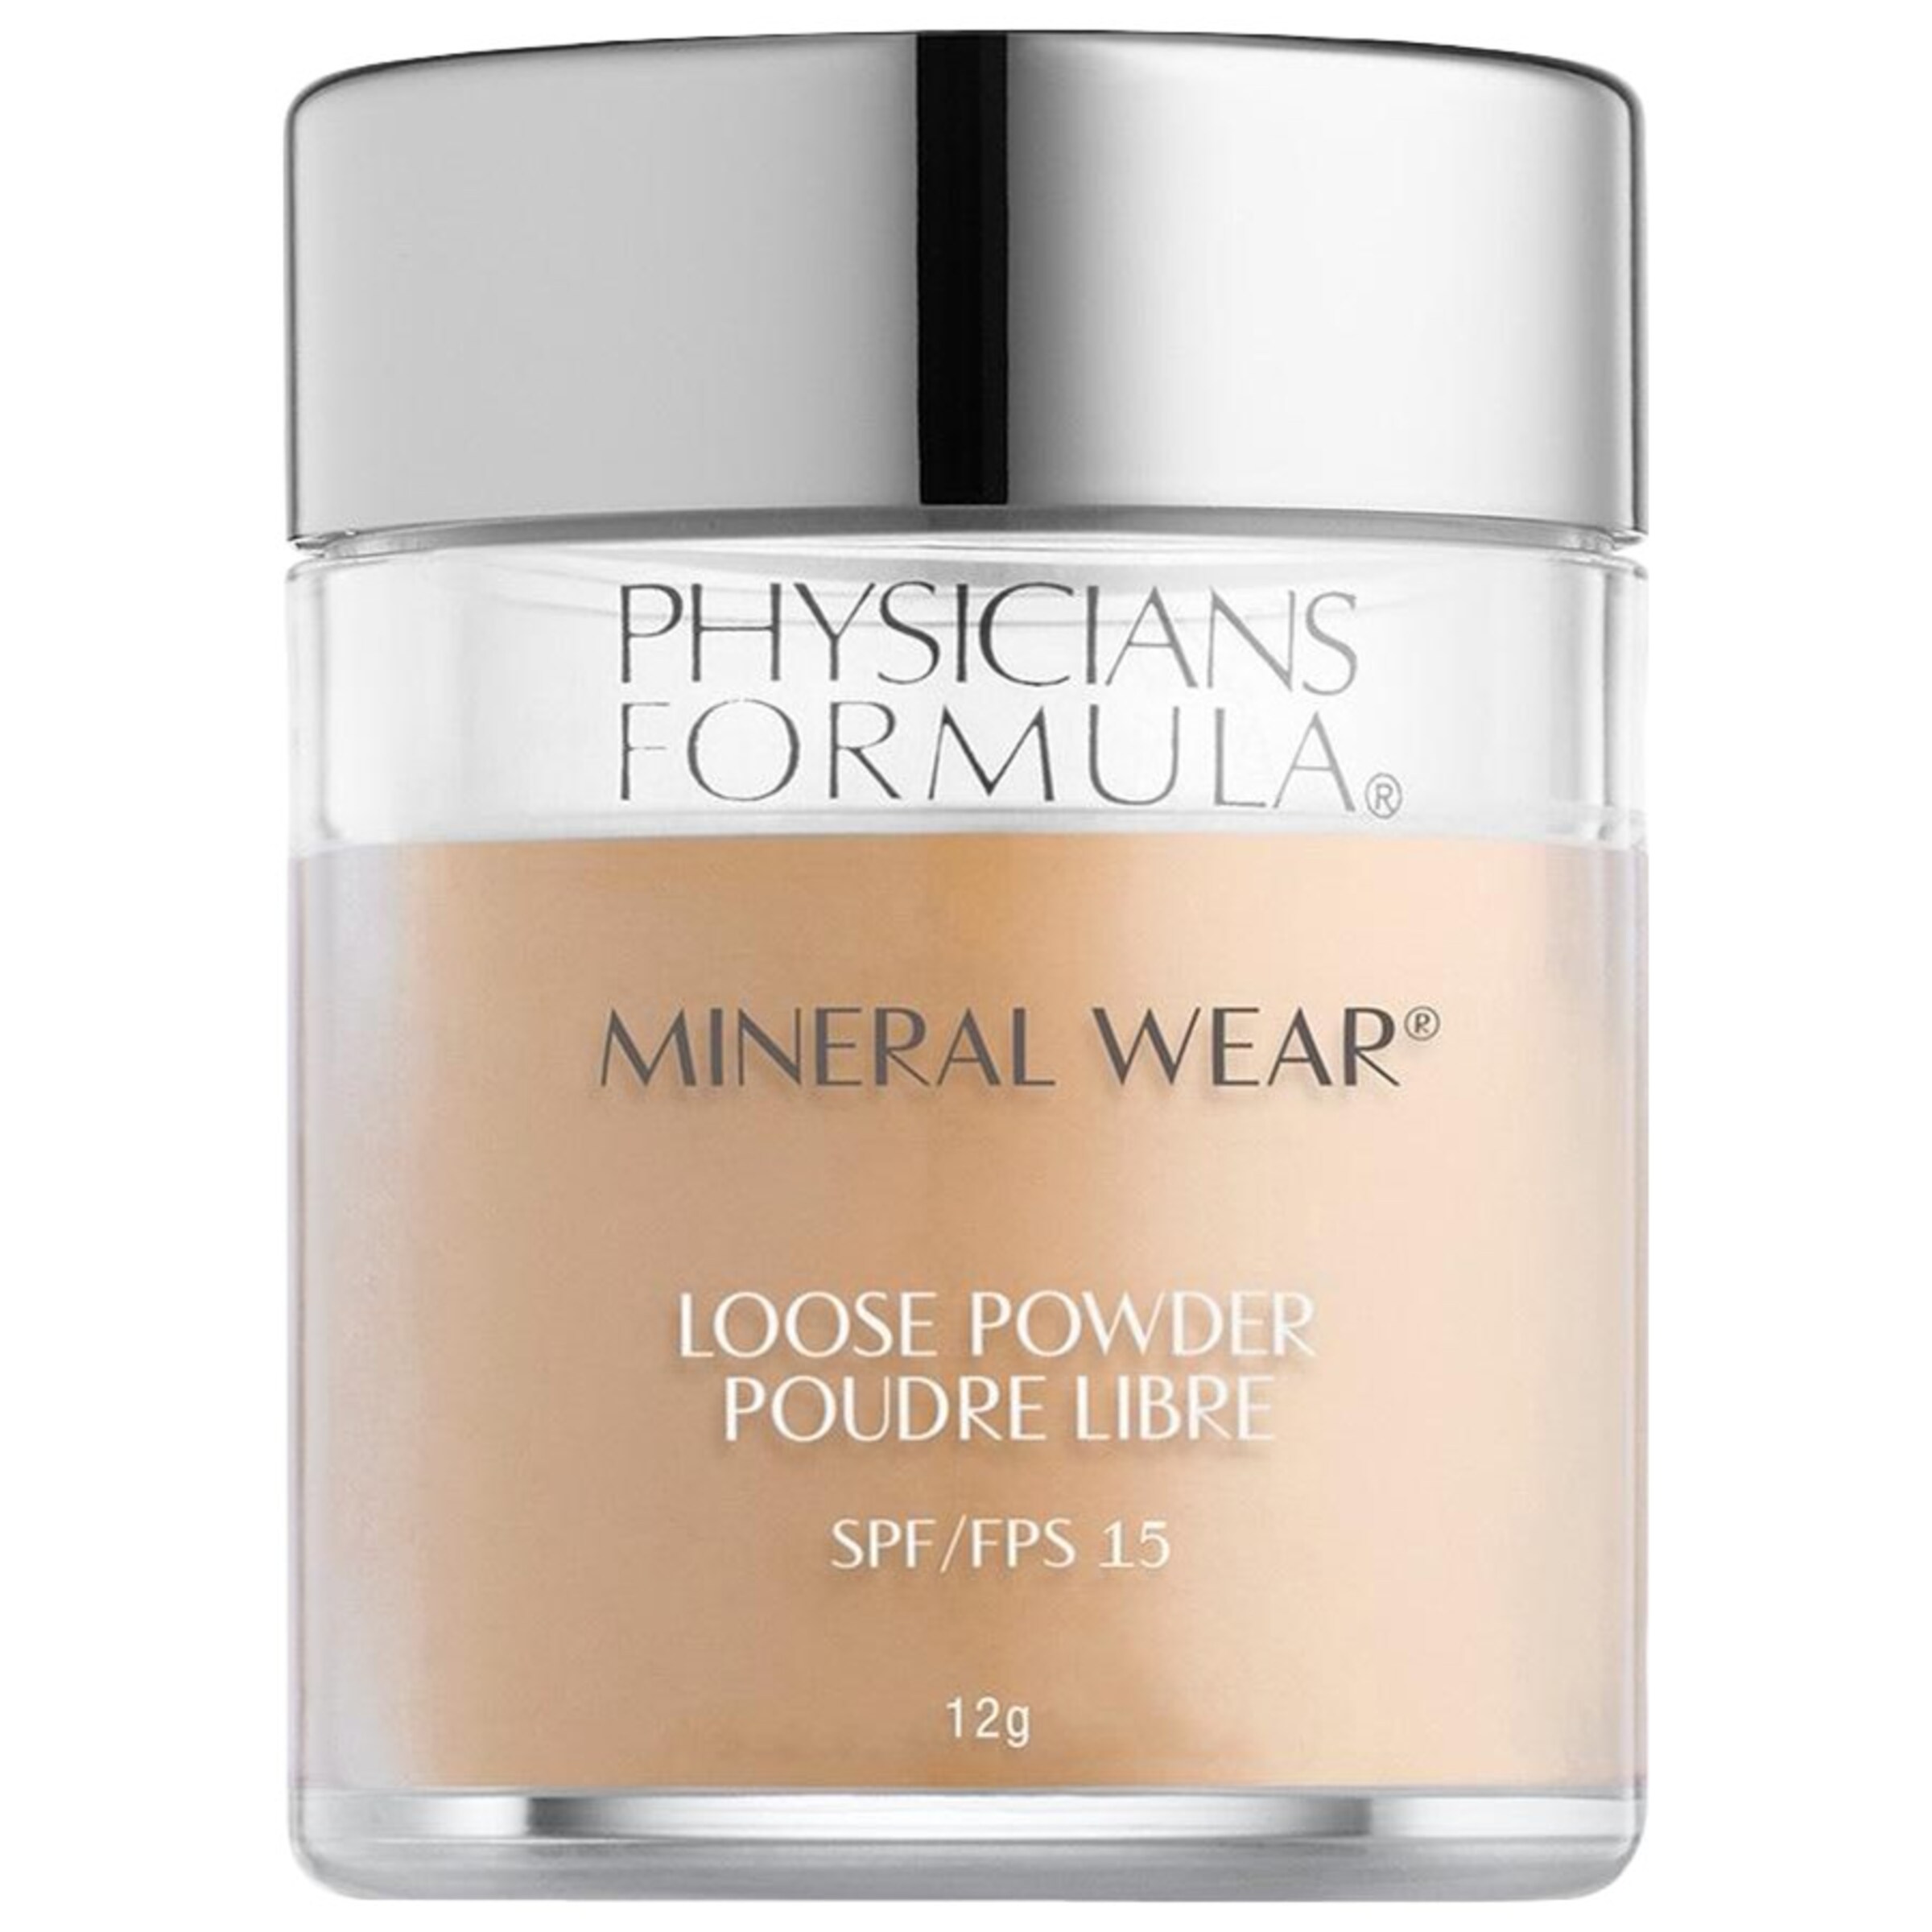 Physicians Formula Mineral Wear Loose Powder in Creme 